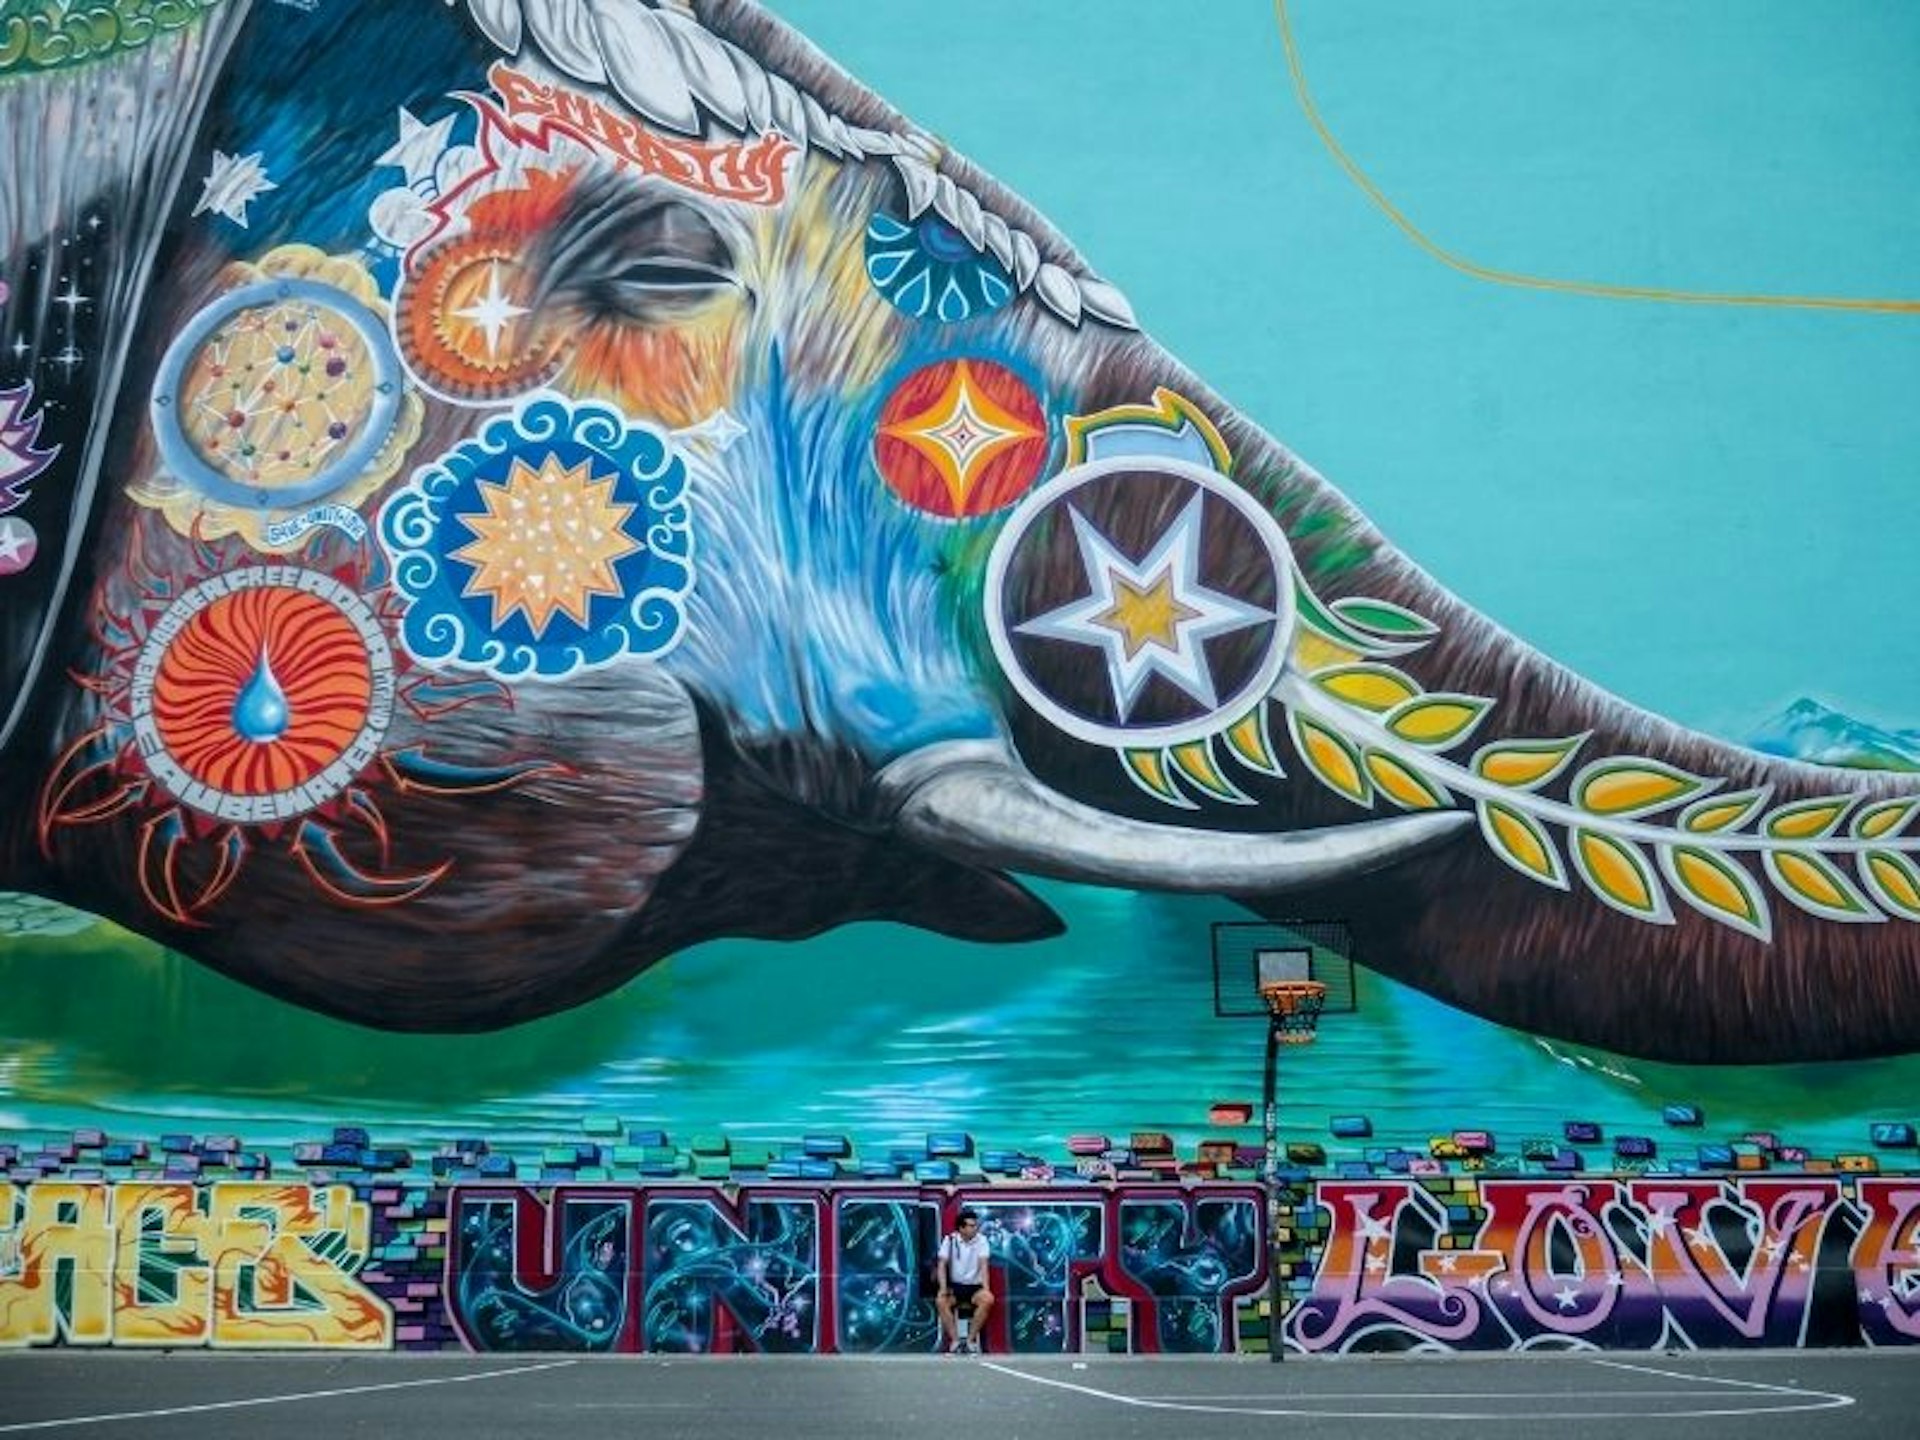 Massive colorful mural of an elephant with tusks holding a ballon in the shape of the earth in its trunk